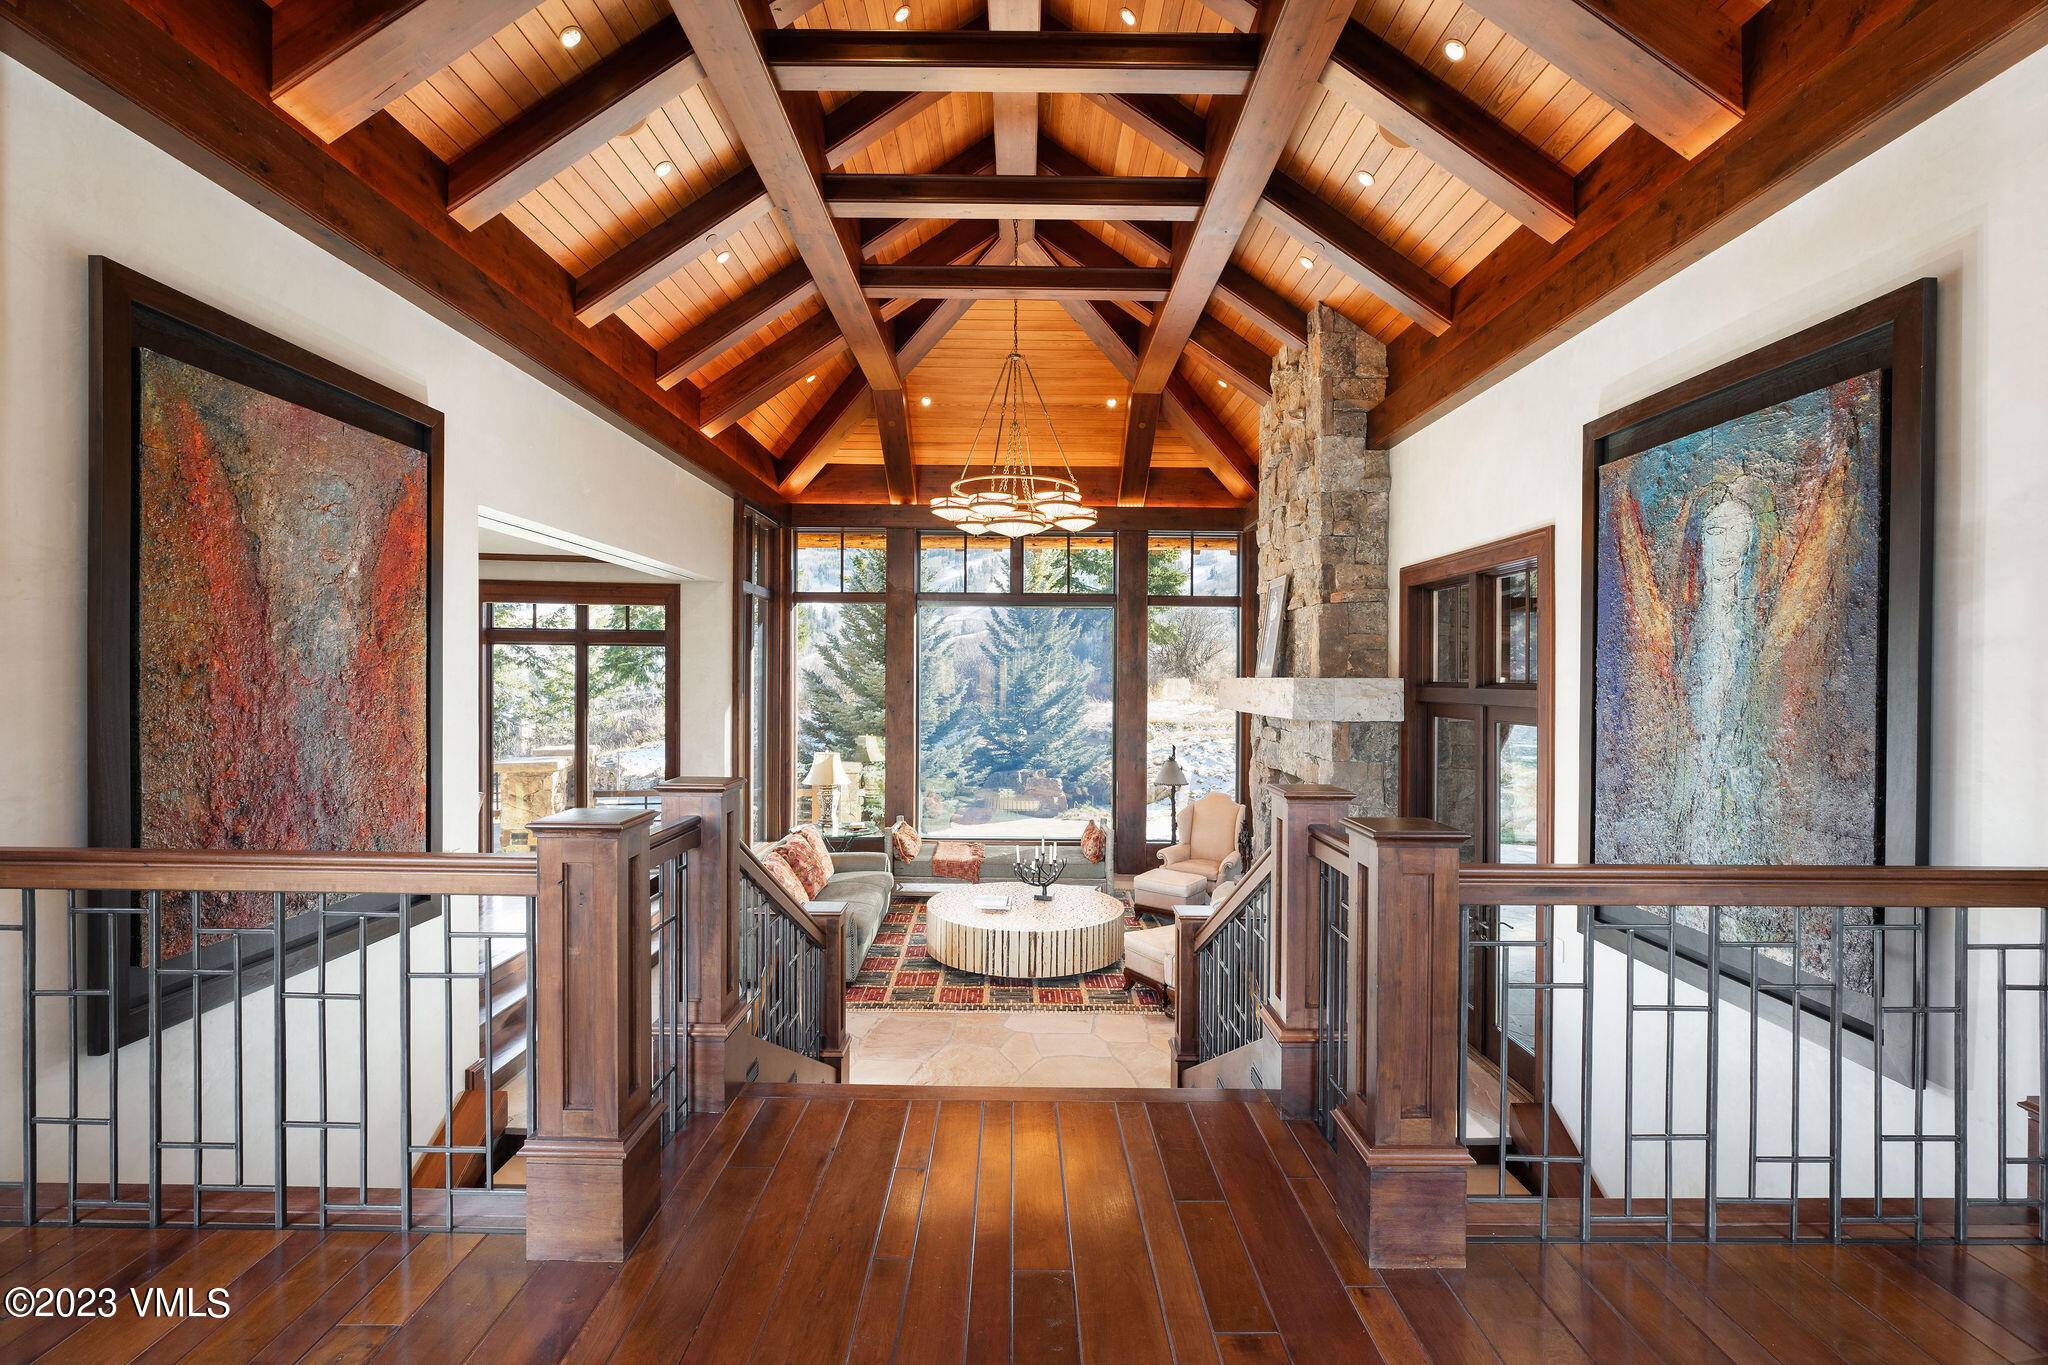 Fall in love with this extraordinary masterpiece a home that will leave you breathless.